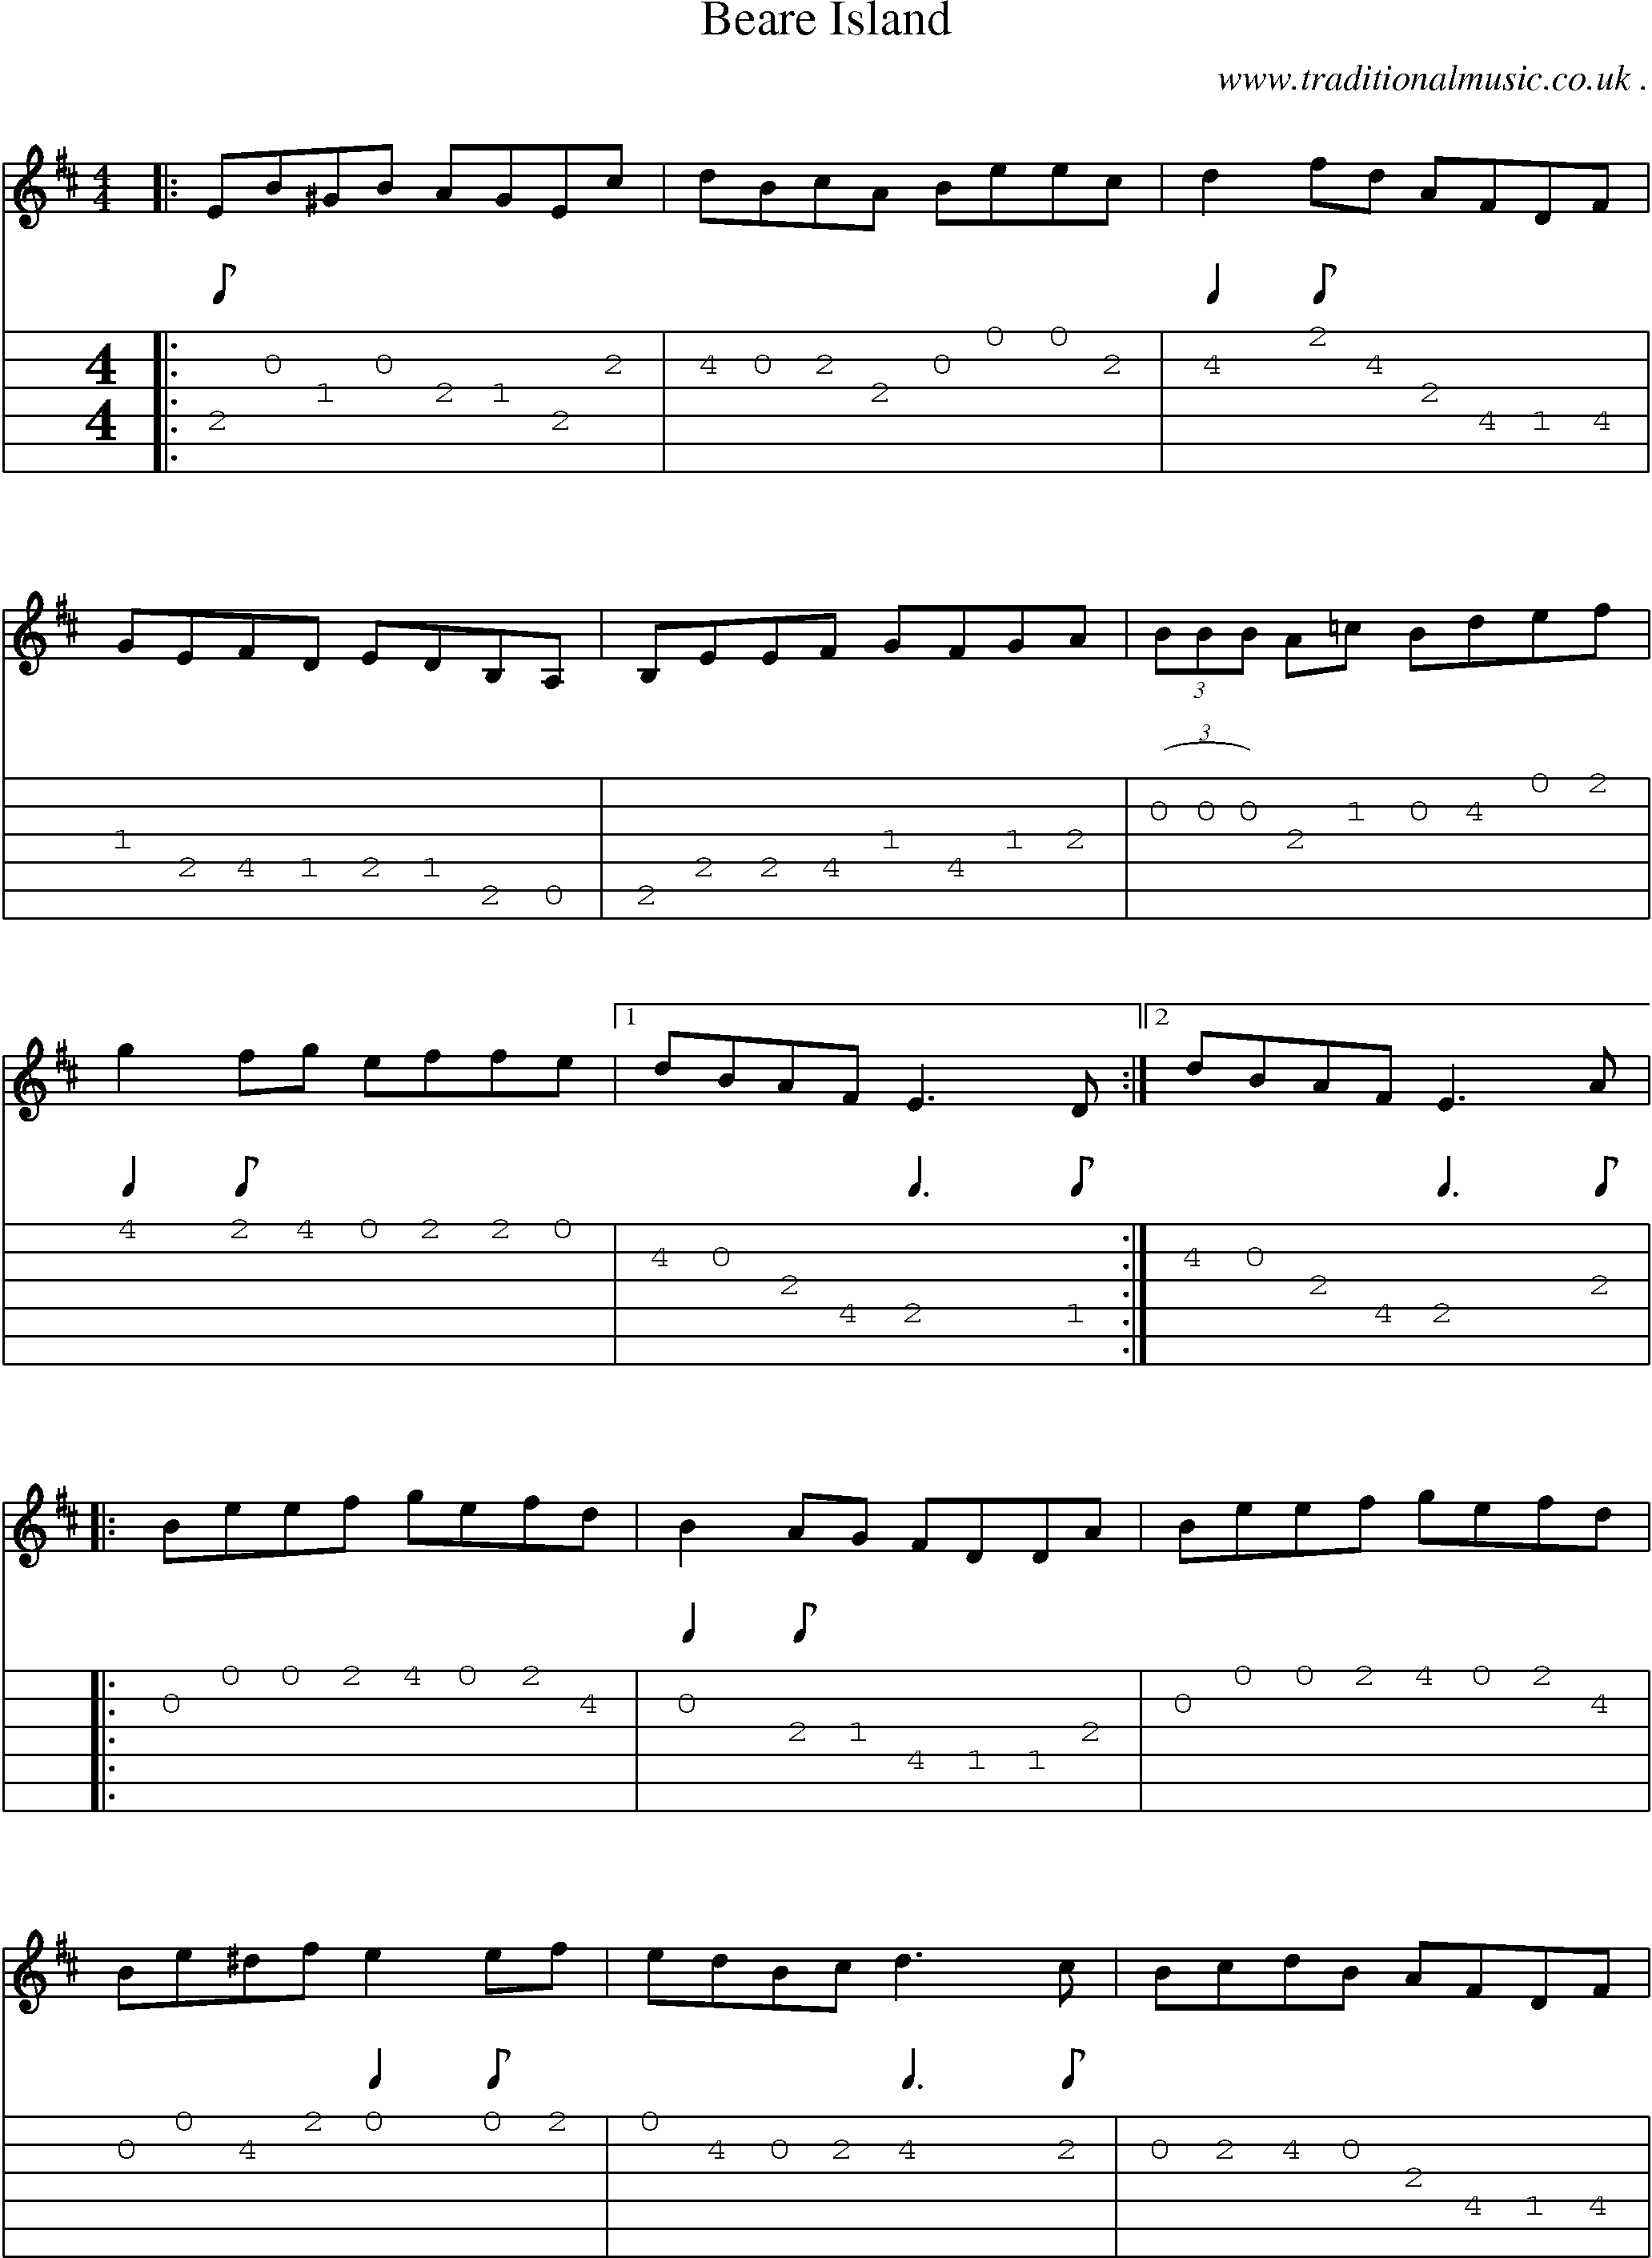 Sheet-Music and Guitar Tabs for Beare Island